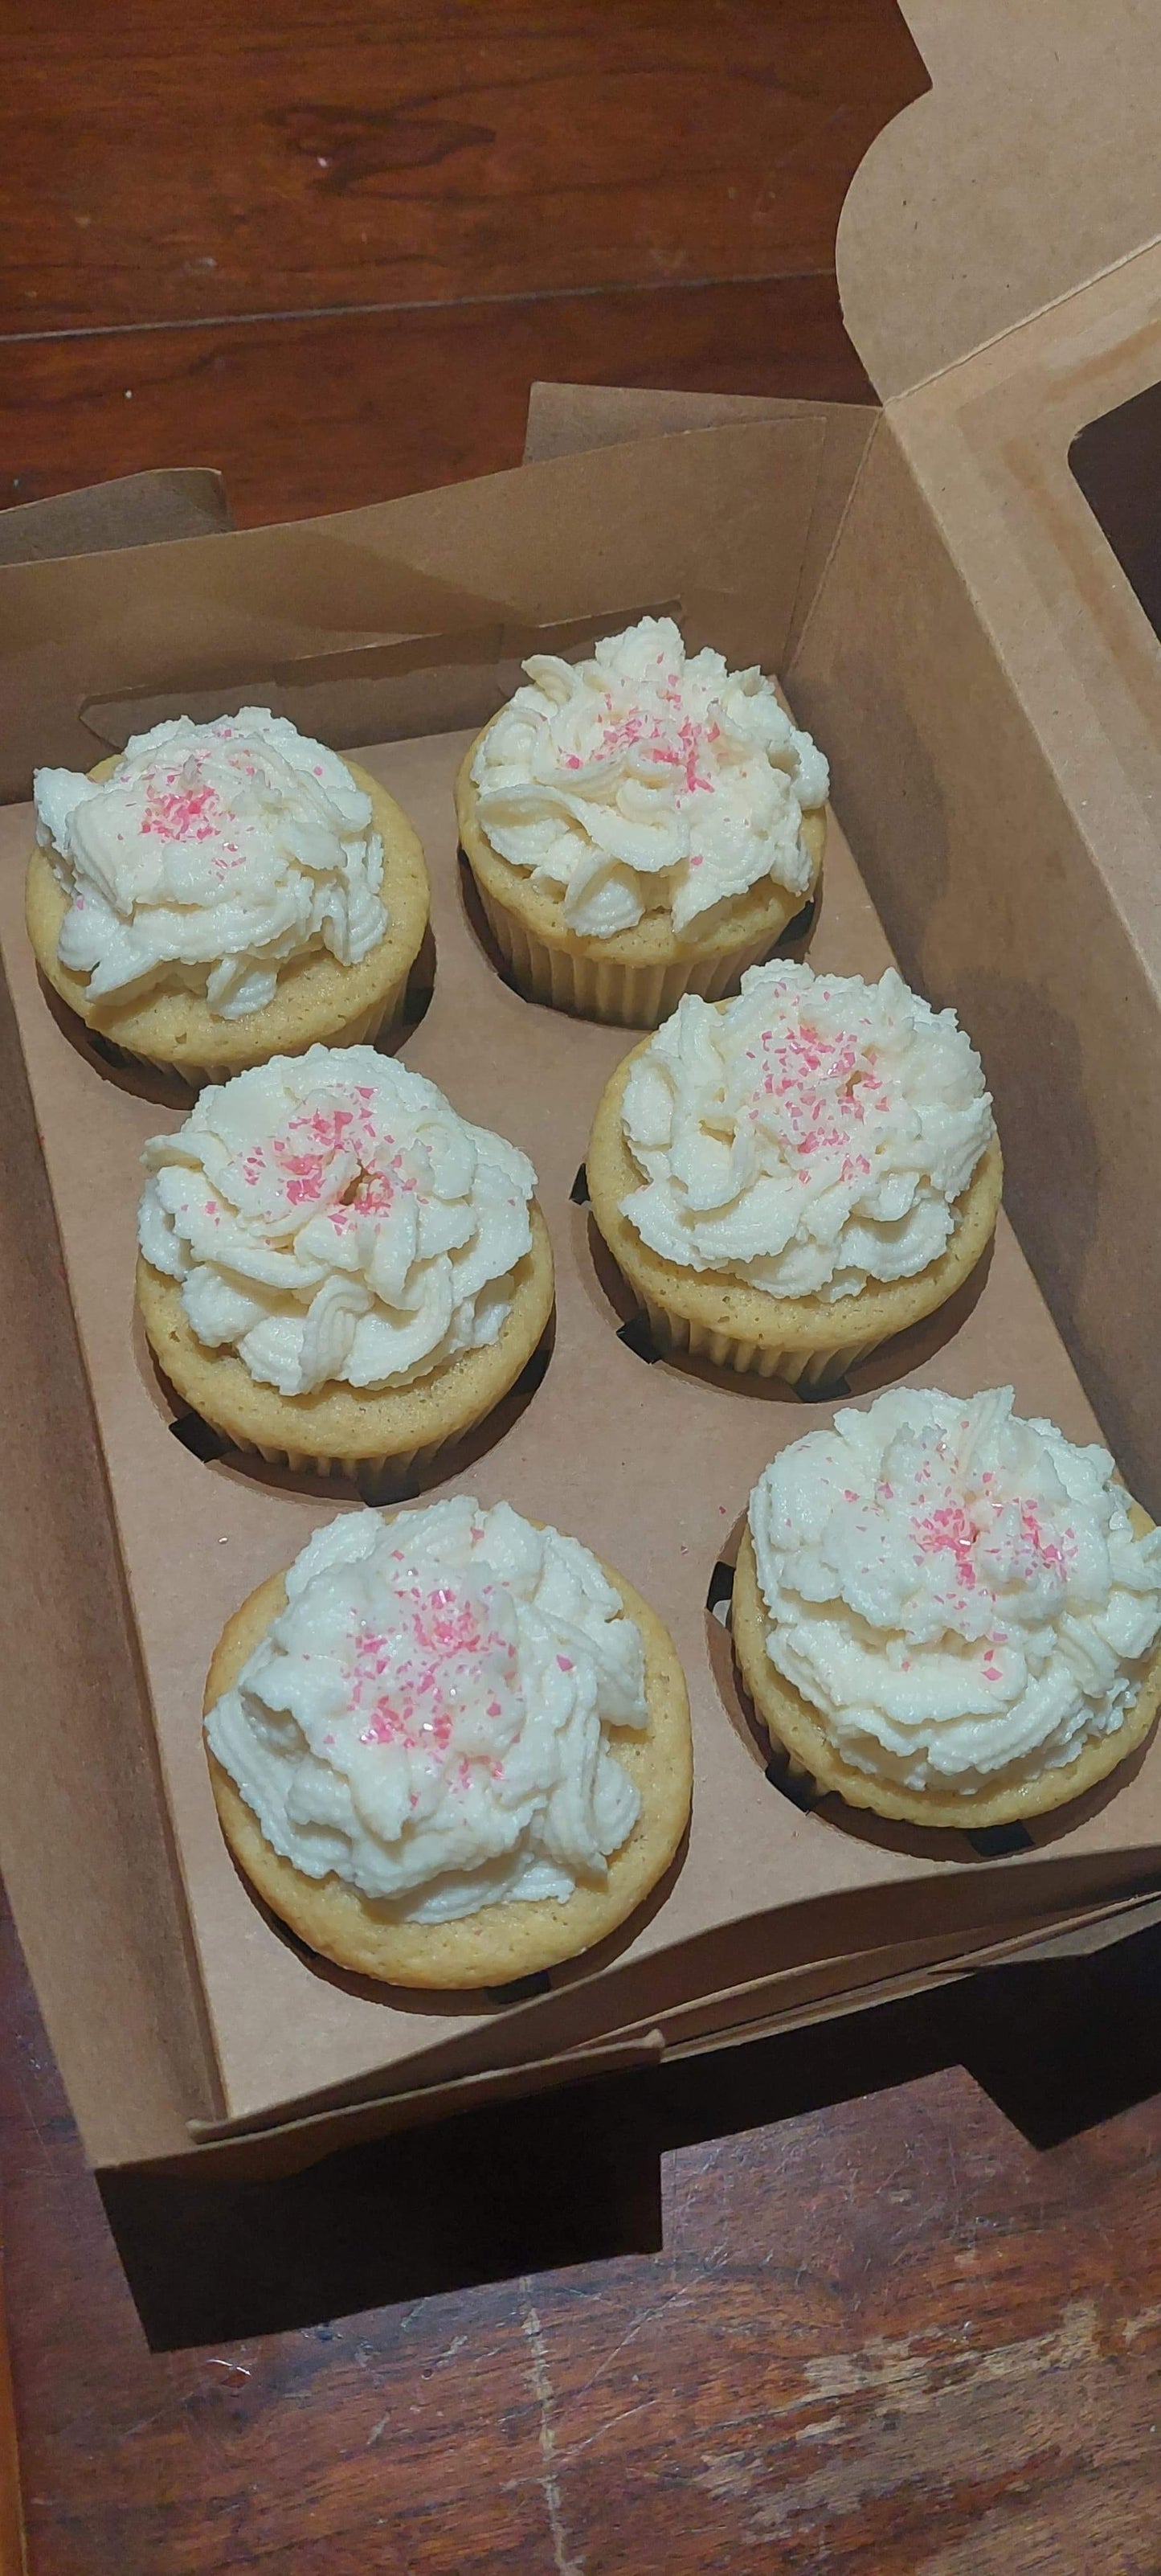 Keto Cupcake Kit- plain cupcakes and a container of icing